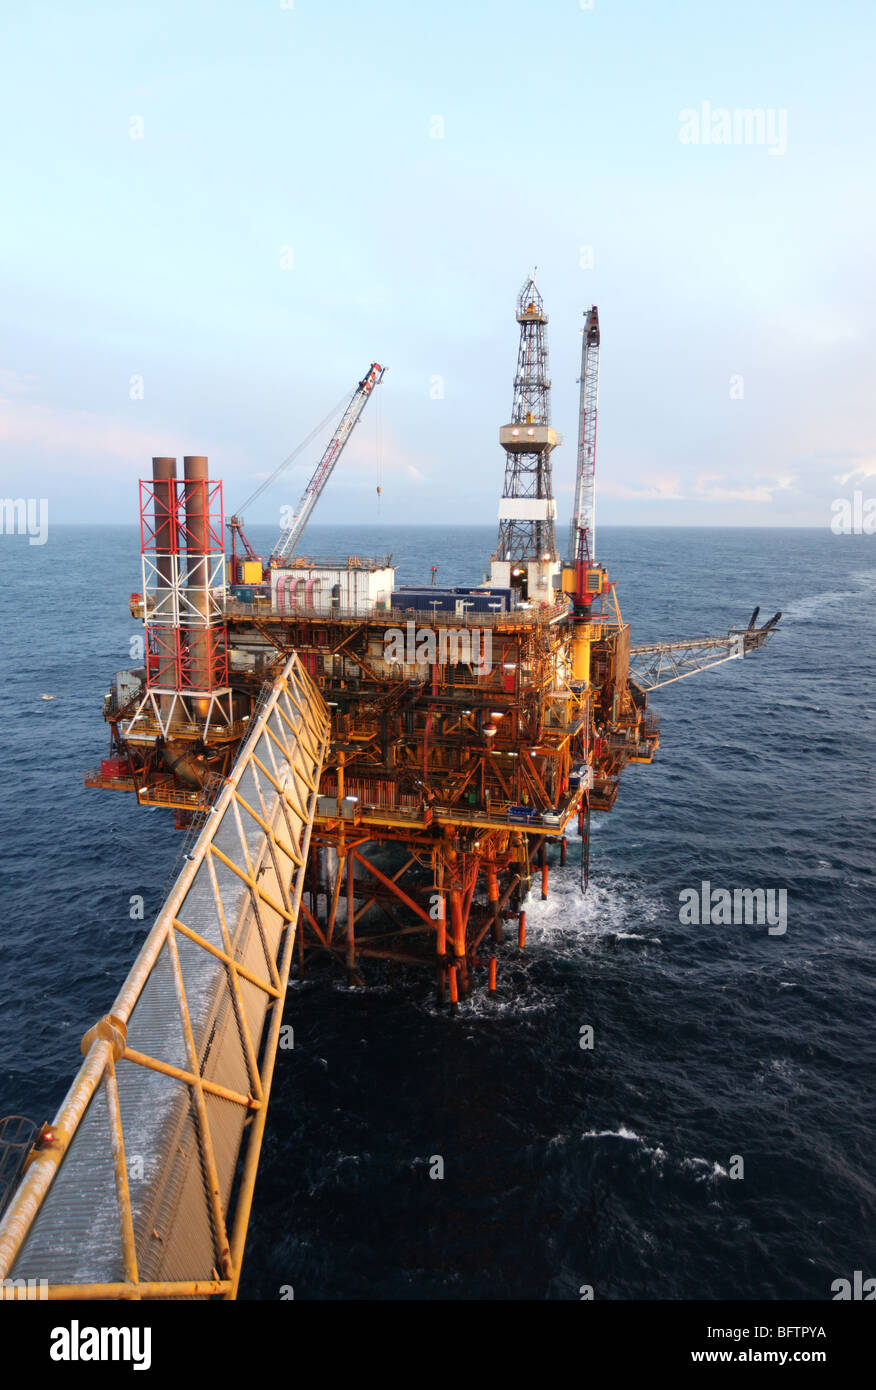 Claymore oil drilling platform in the north sea off the coast of Aberdeen, Scotland, UK Stock Photo